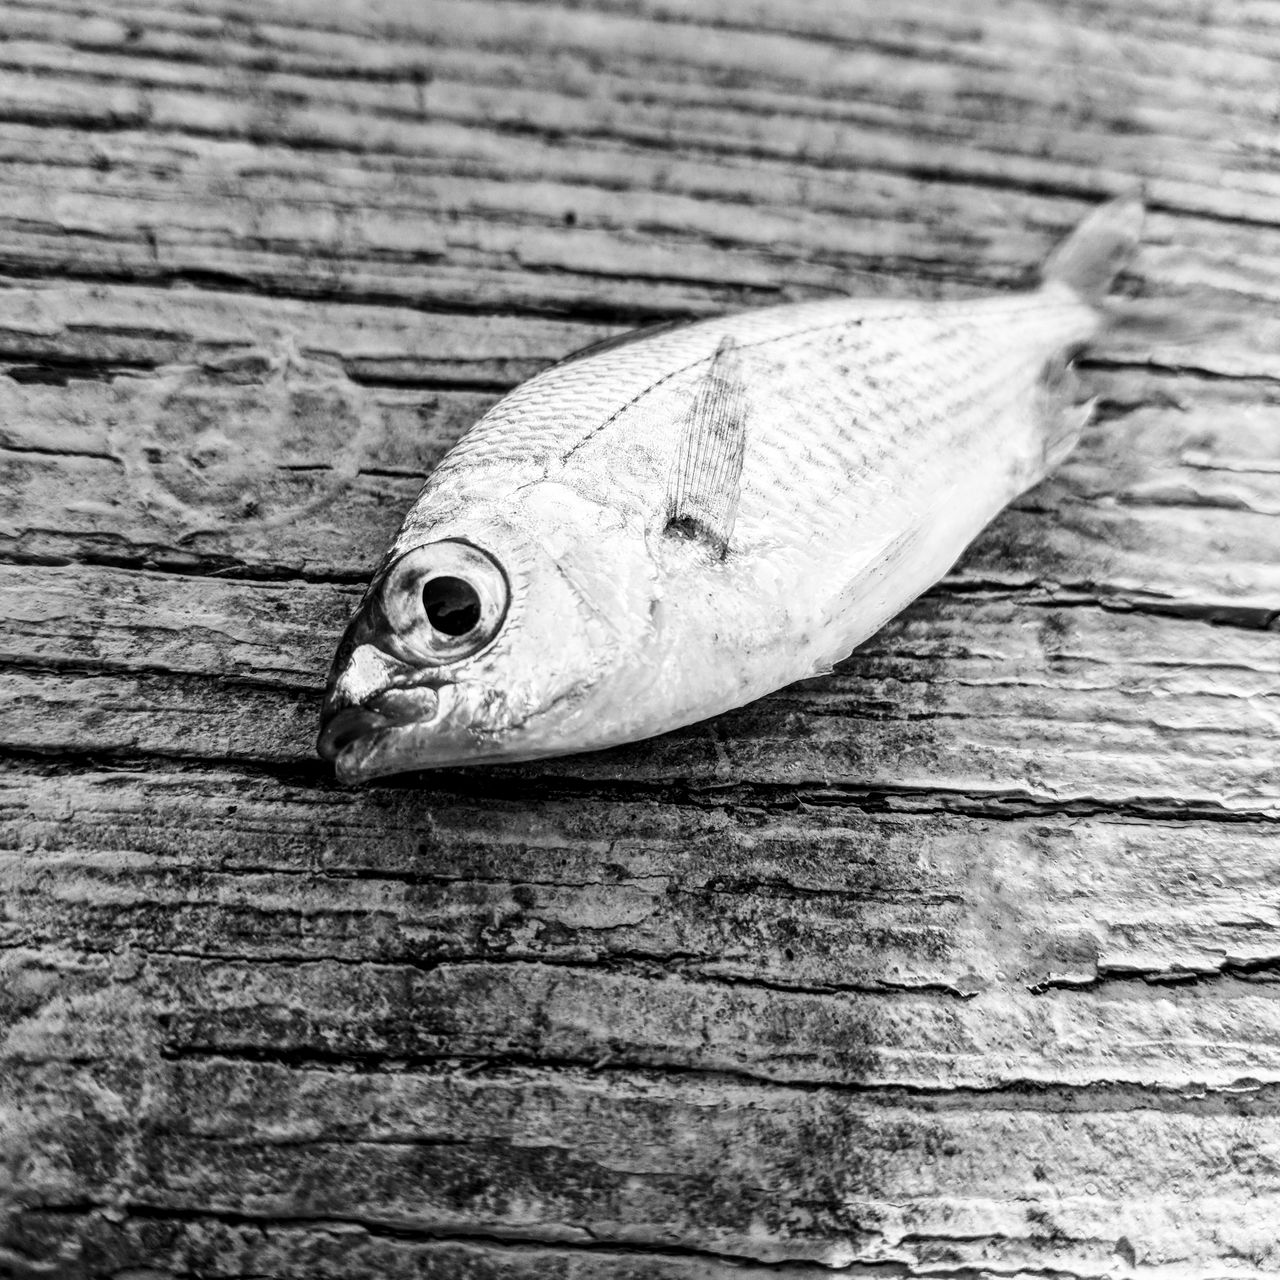 Little fish on a dock